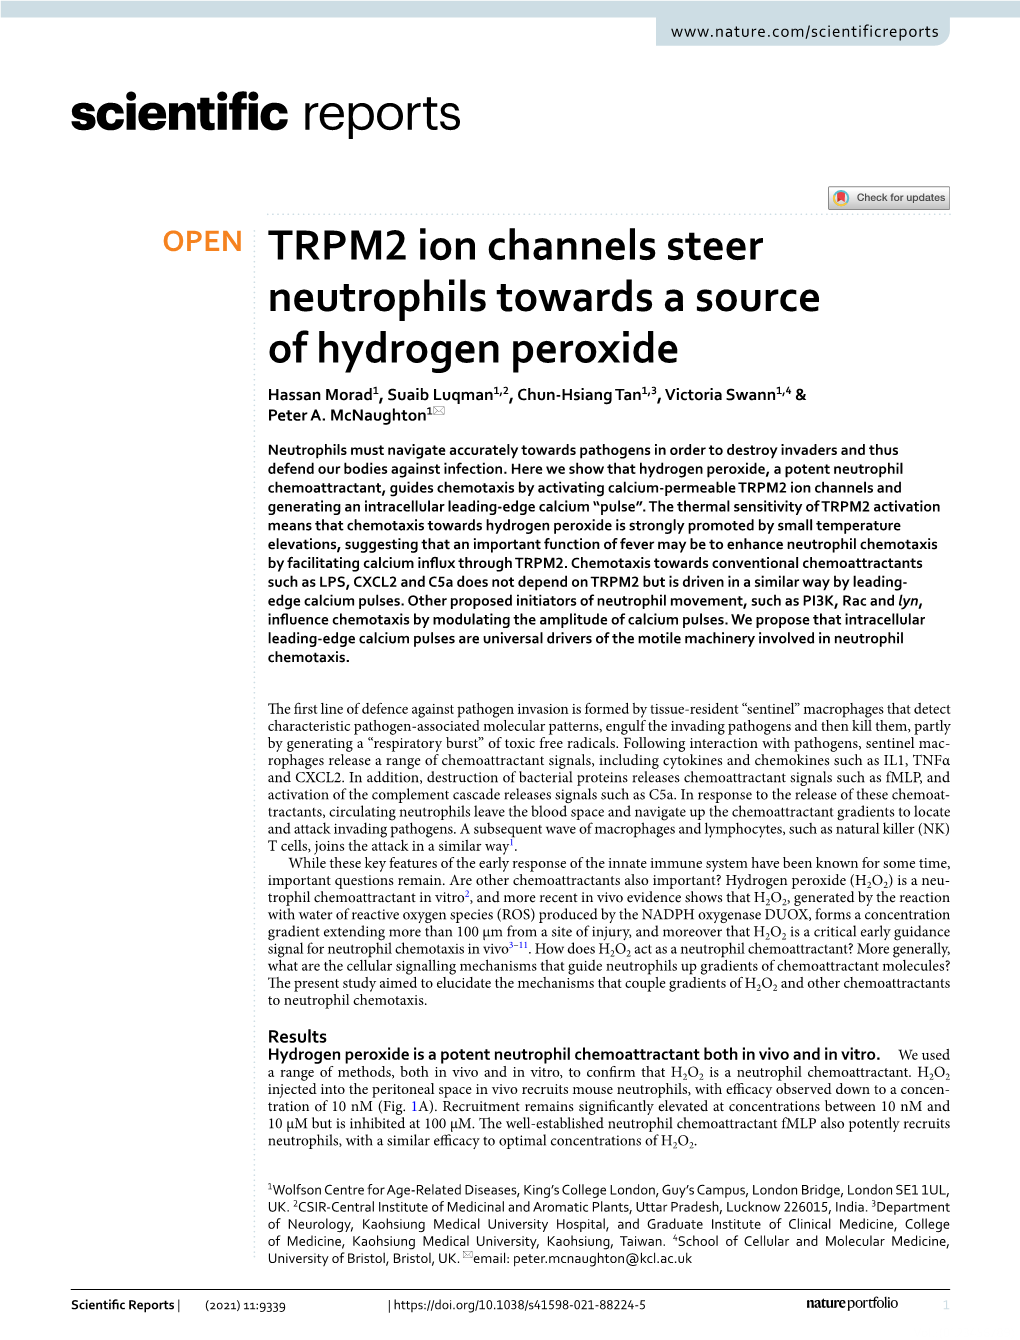 TRPM2 Ion Channels Steer Neutrophils Towards a Source of Hydrogen Peroxide Hassan Morad1, Suaib Luqman1,2, Chun‑Hsiang Tan1,3, Victoria Swann1,4 & Peter A